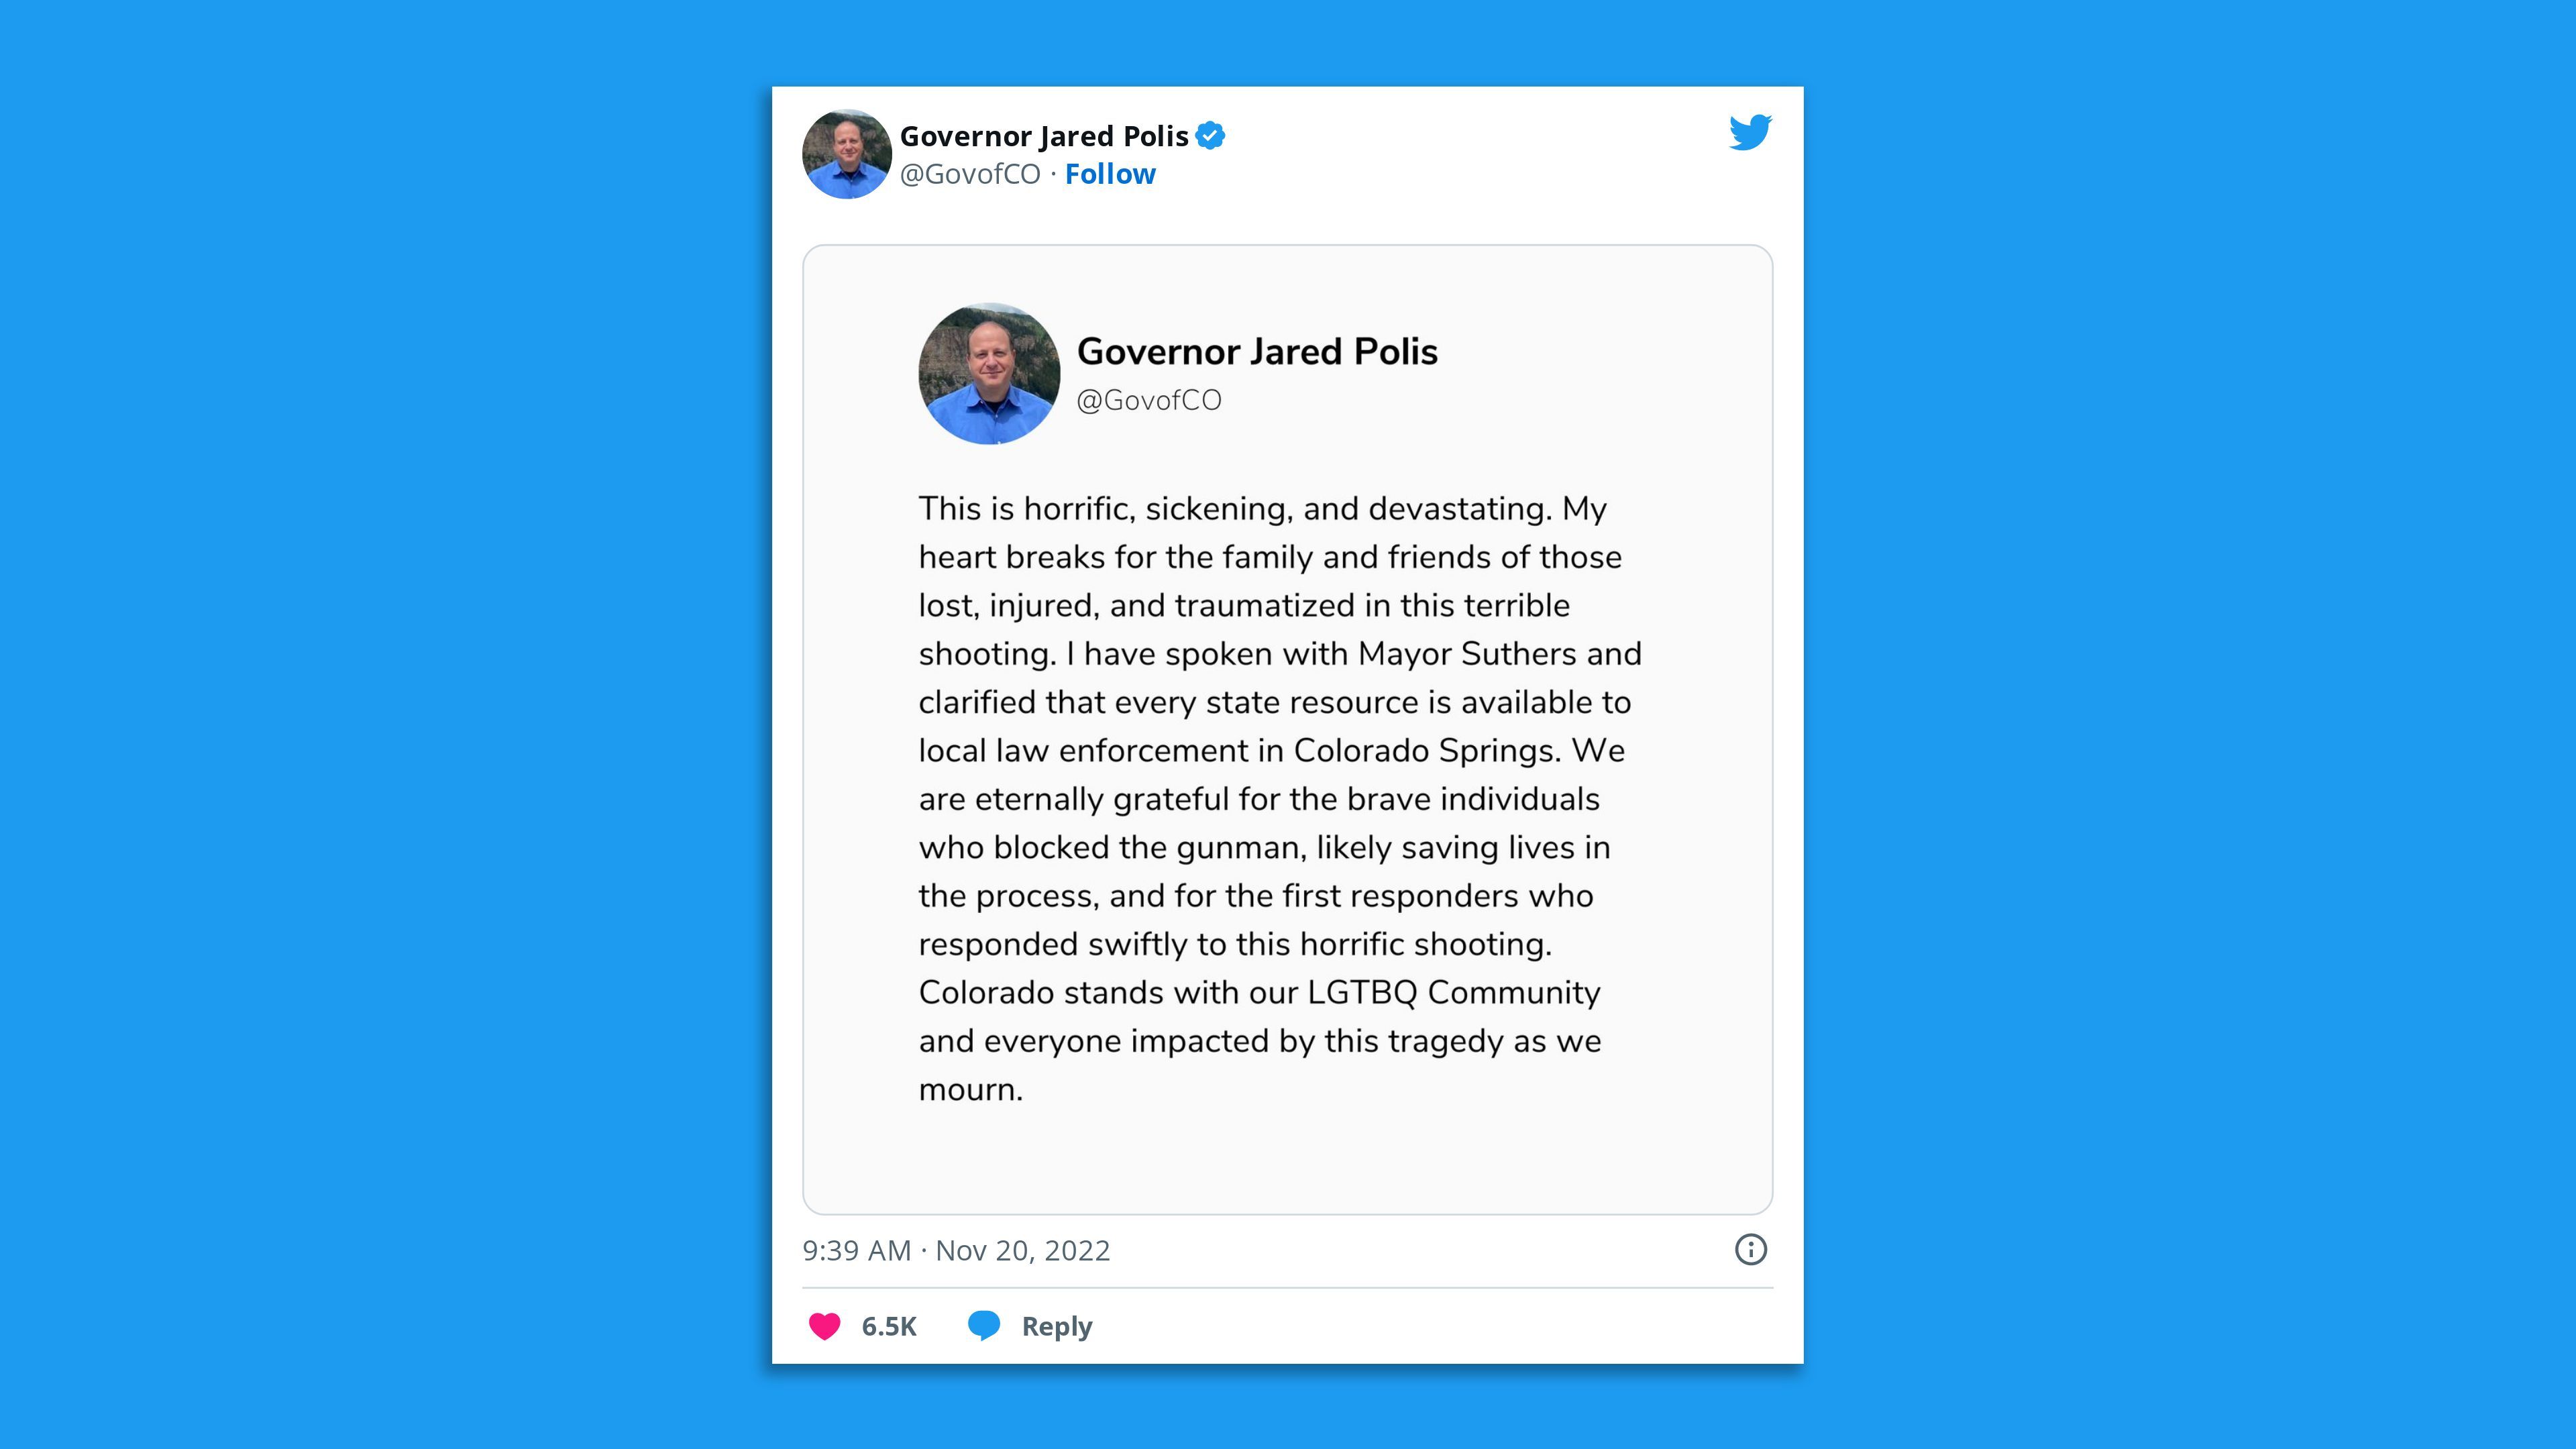 A screenshot of a tweet from Colorado Gov. Jared Polis condemning the Colorado Springs nightclub shooting and saying he stands with the LGBTQ community.